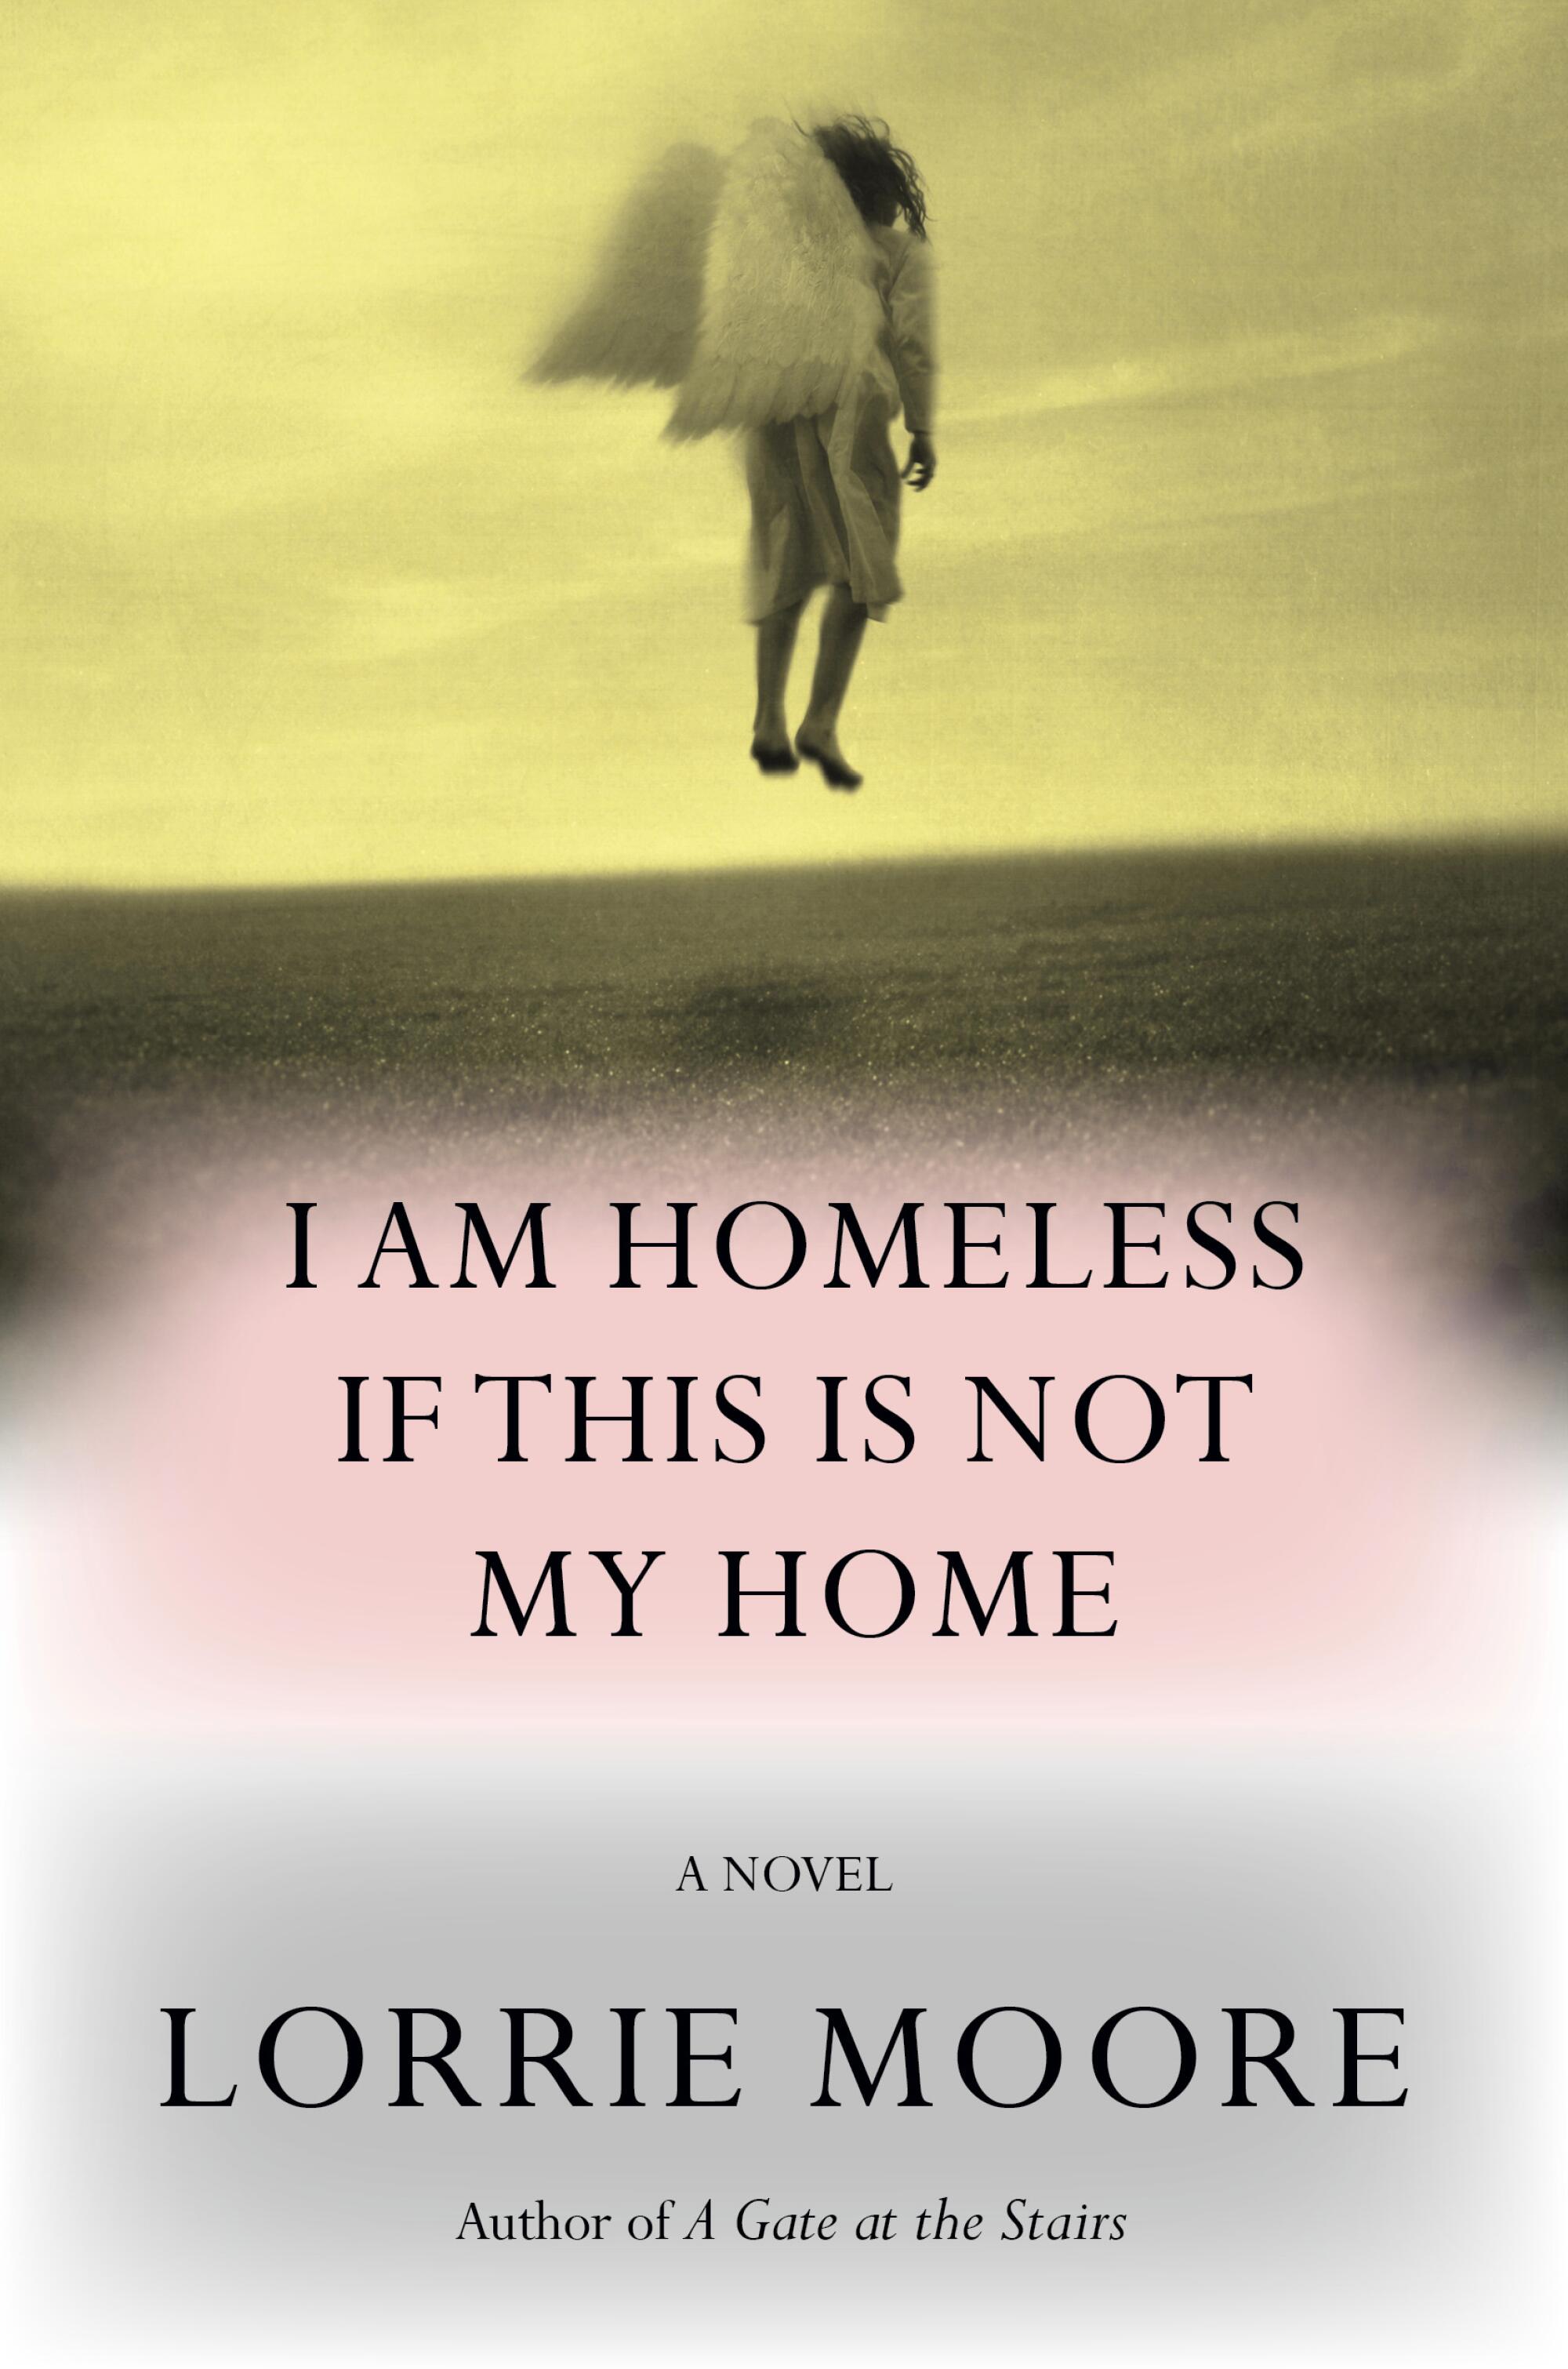 'I Am Homeless if This is Not My Home,' by Lorrie Moore